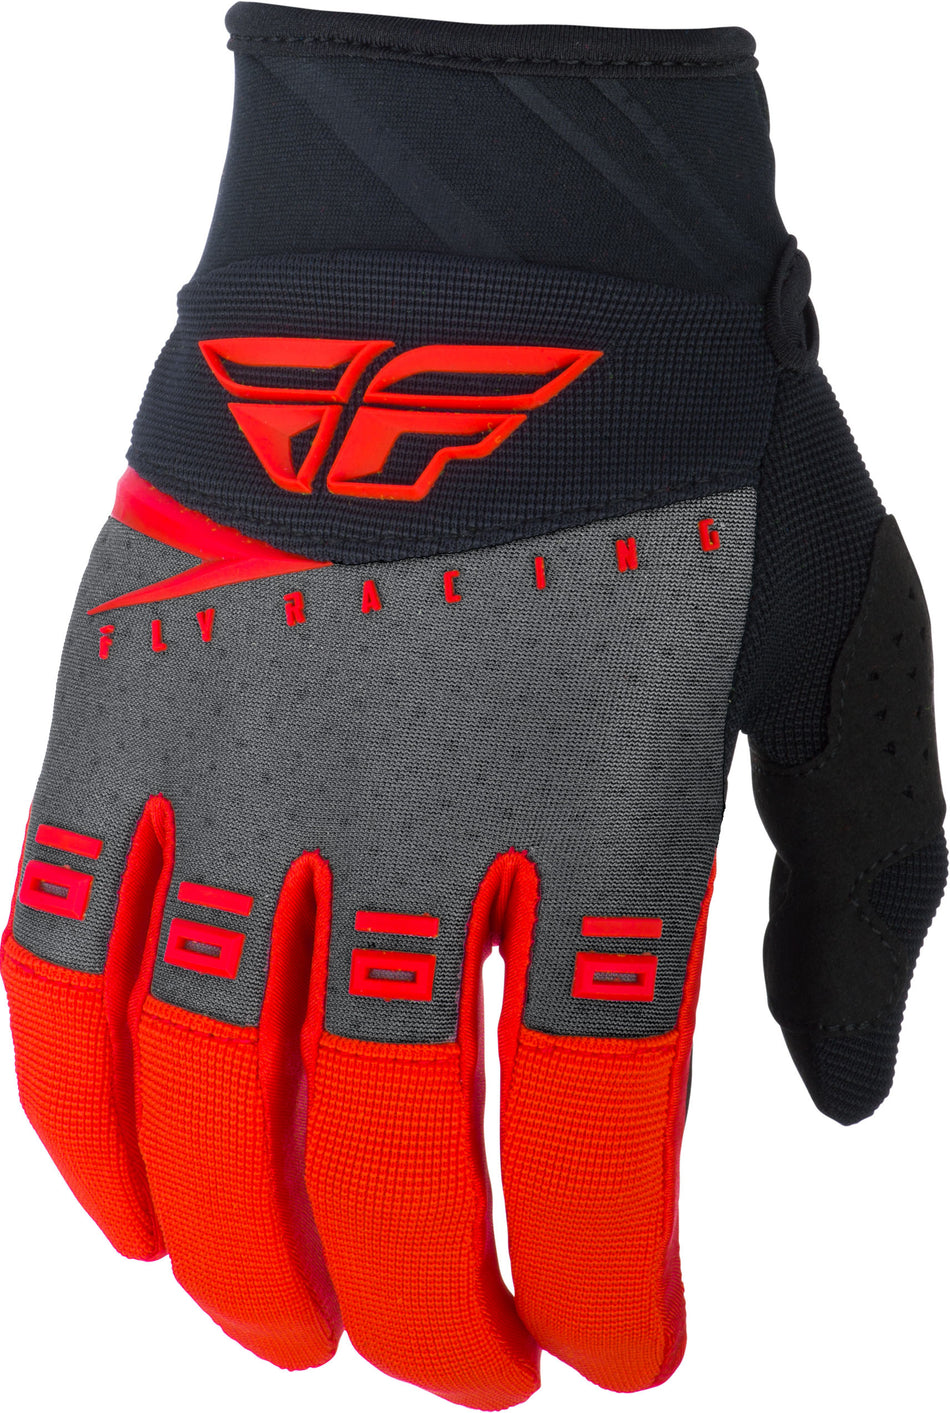 FLY RACING F-16 Gloves Red/Black Grey Sz 01 372-91201